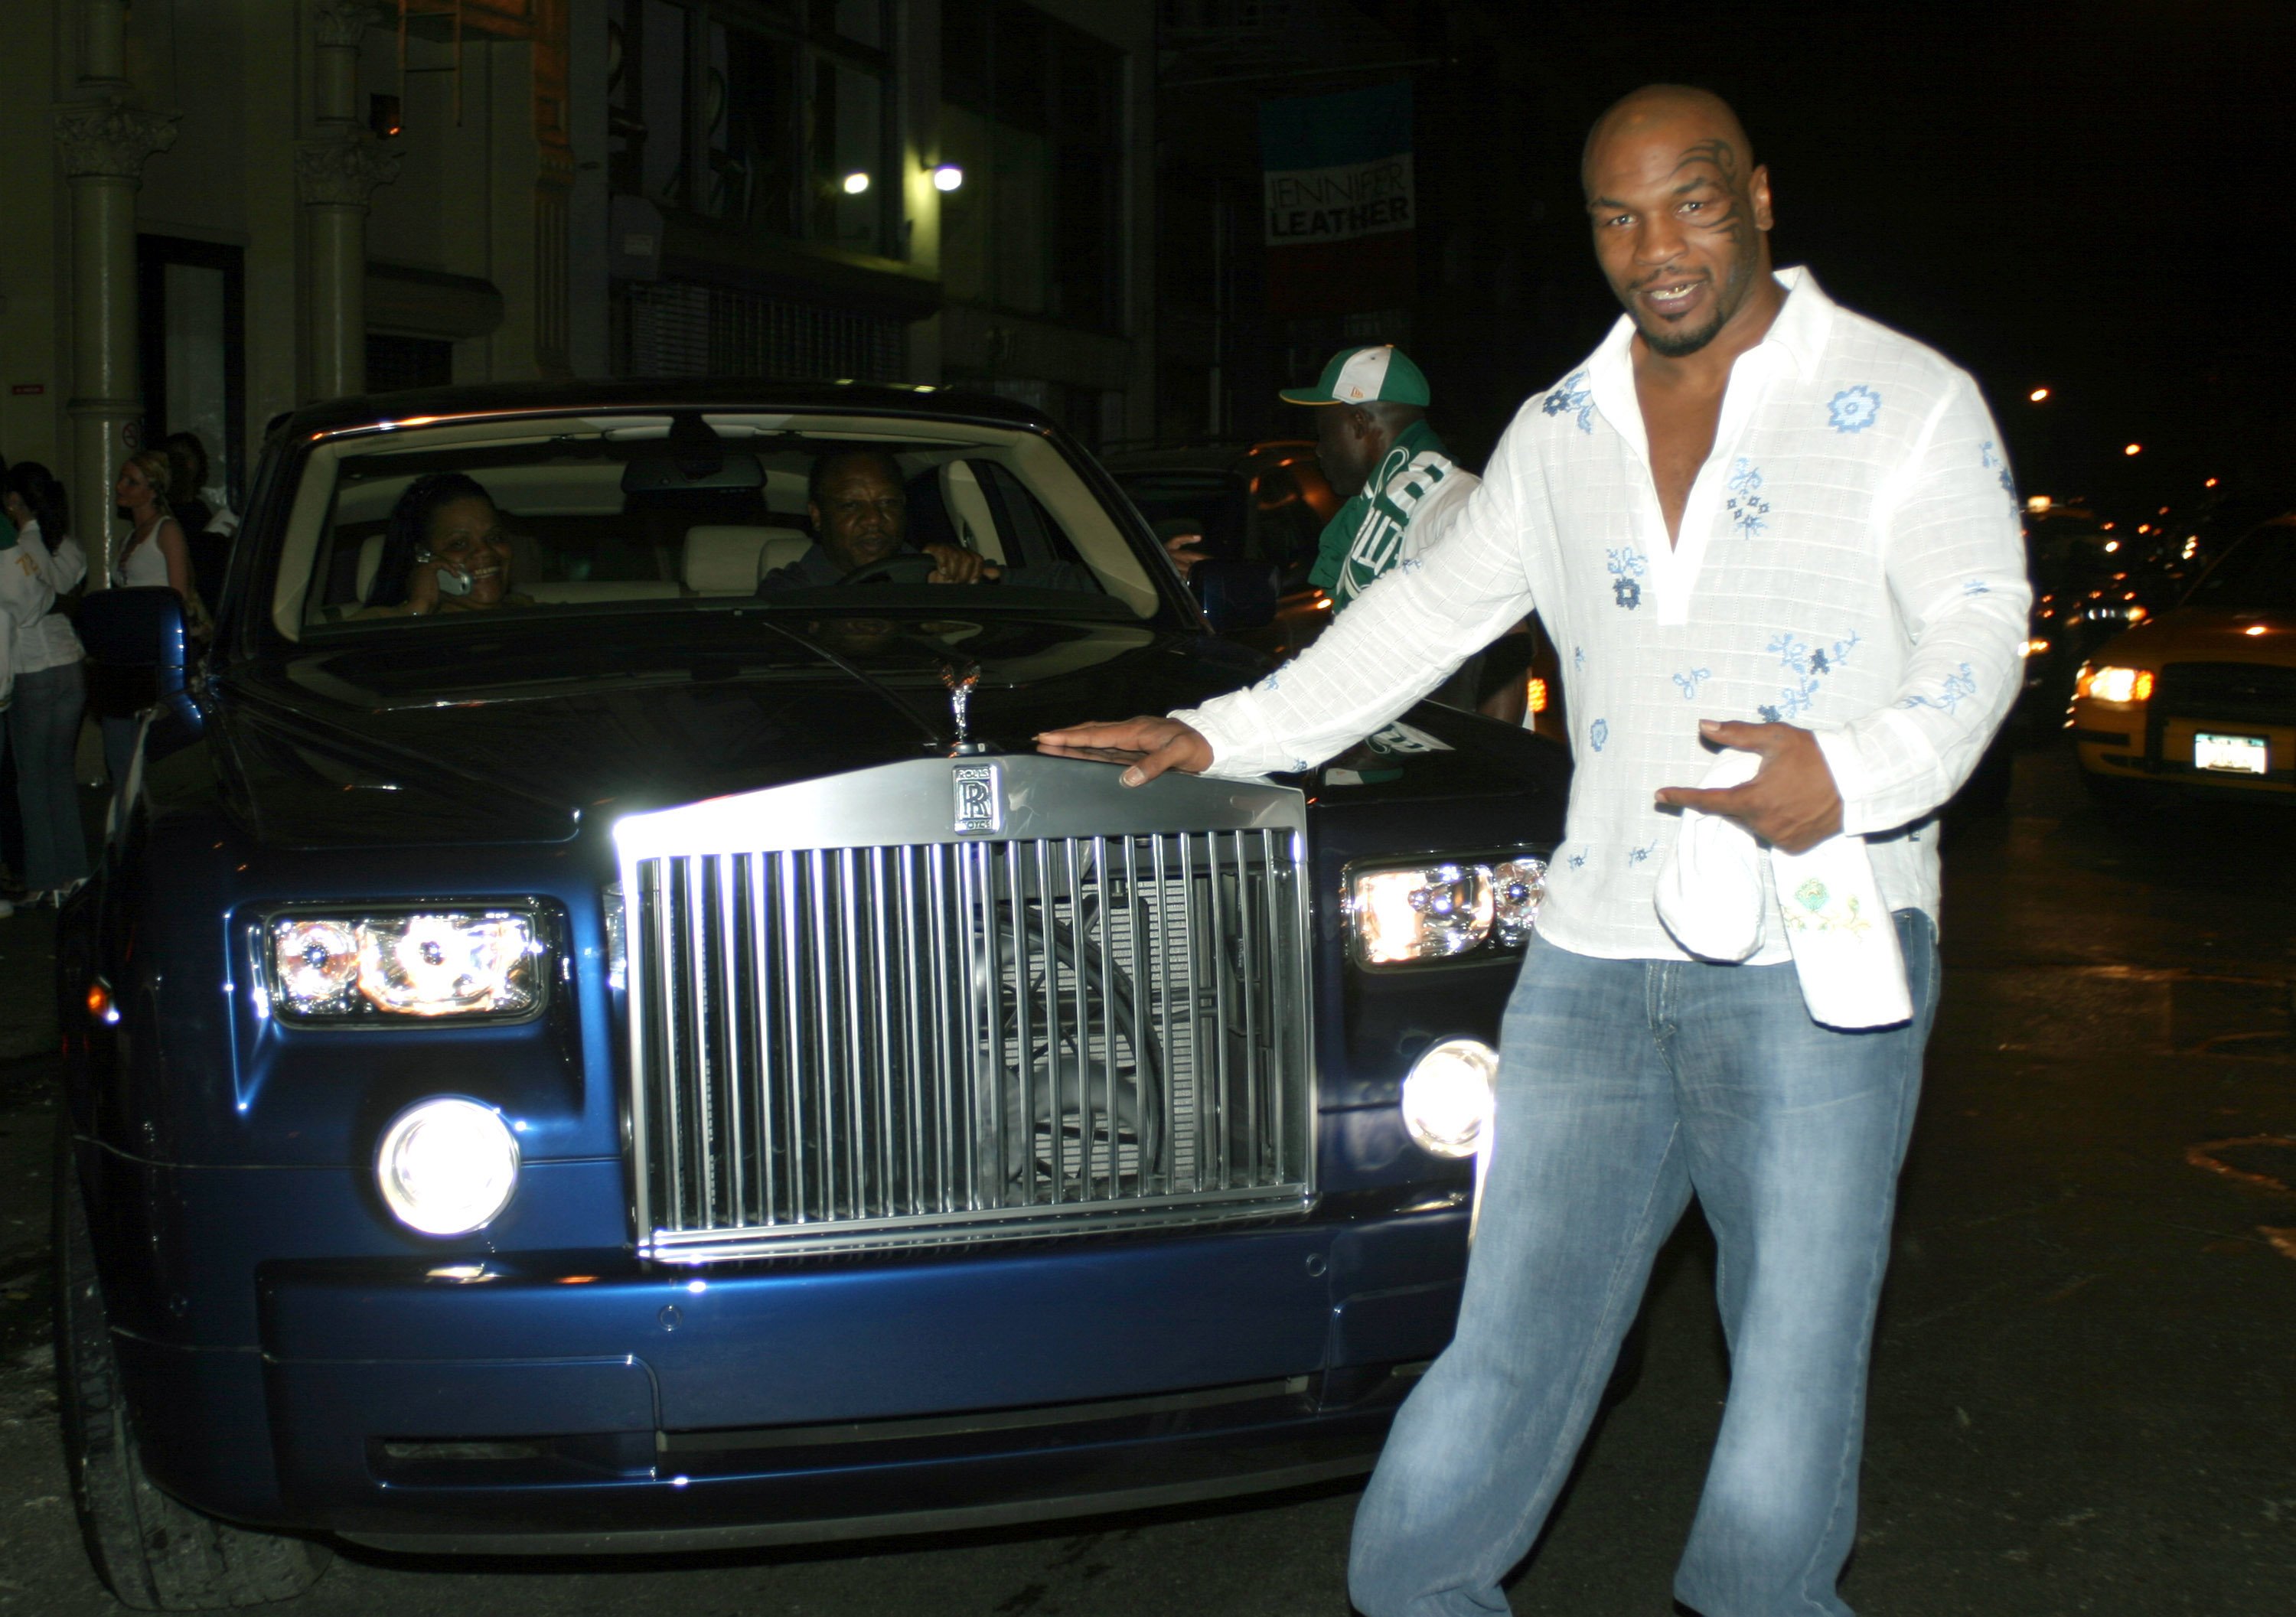 Mike Tyson posing next to a car